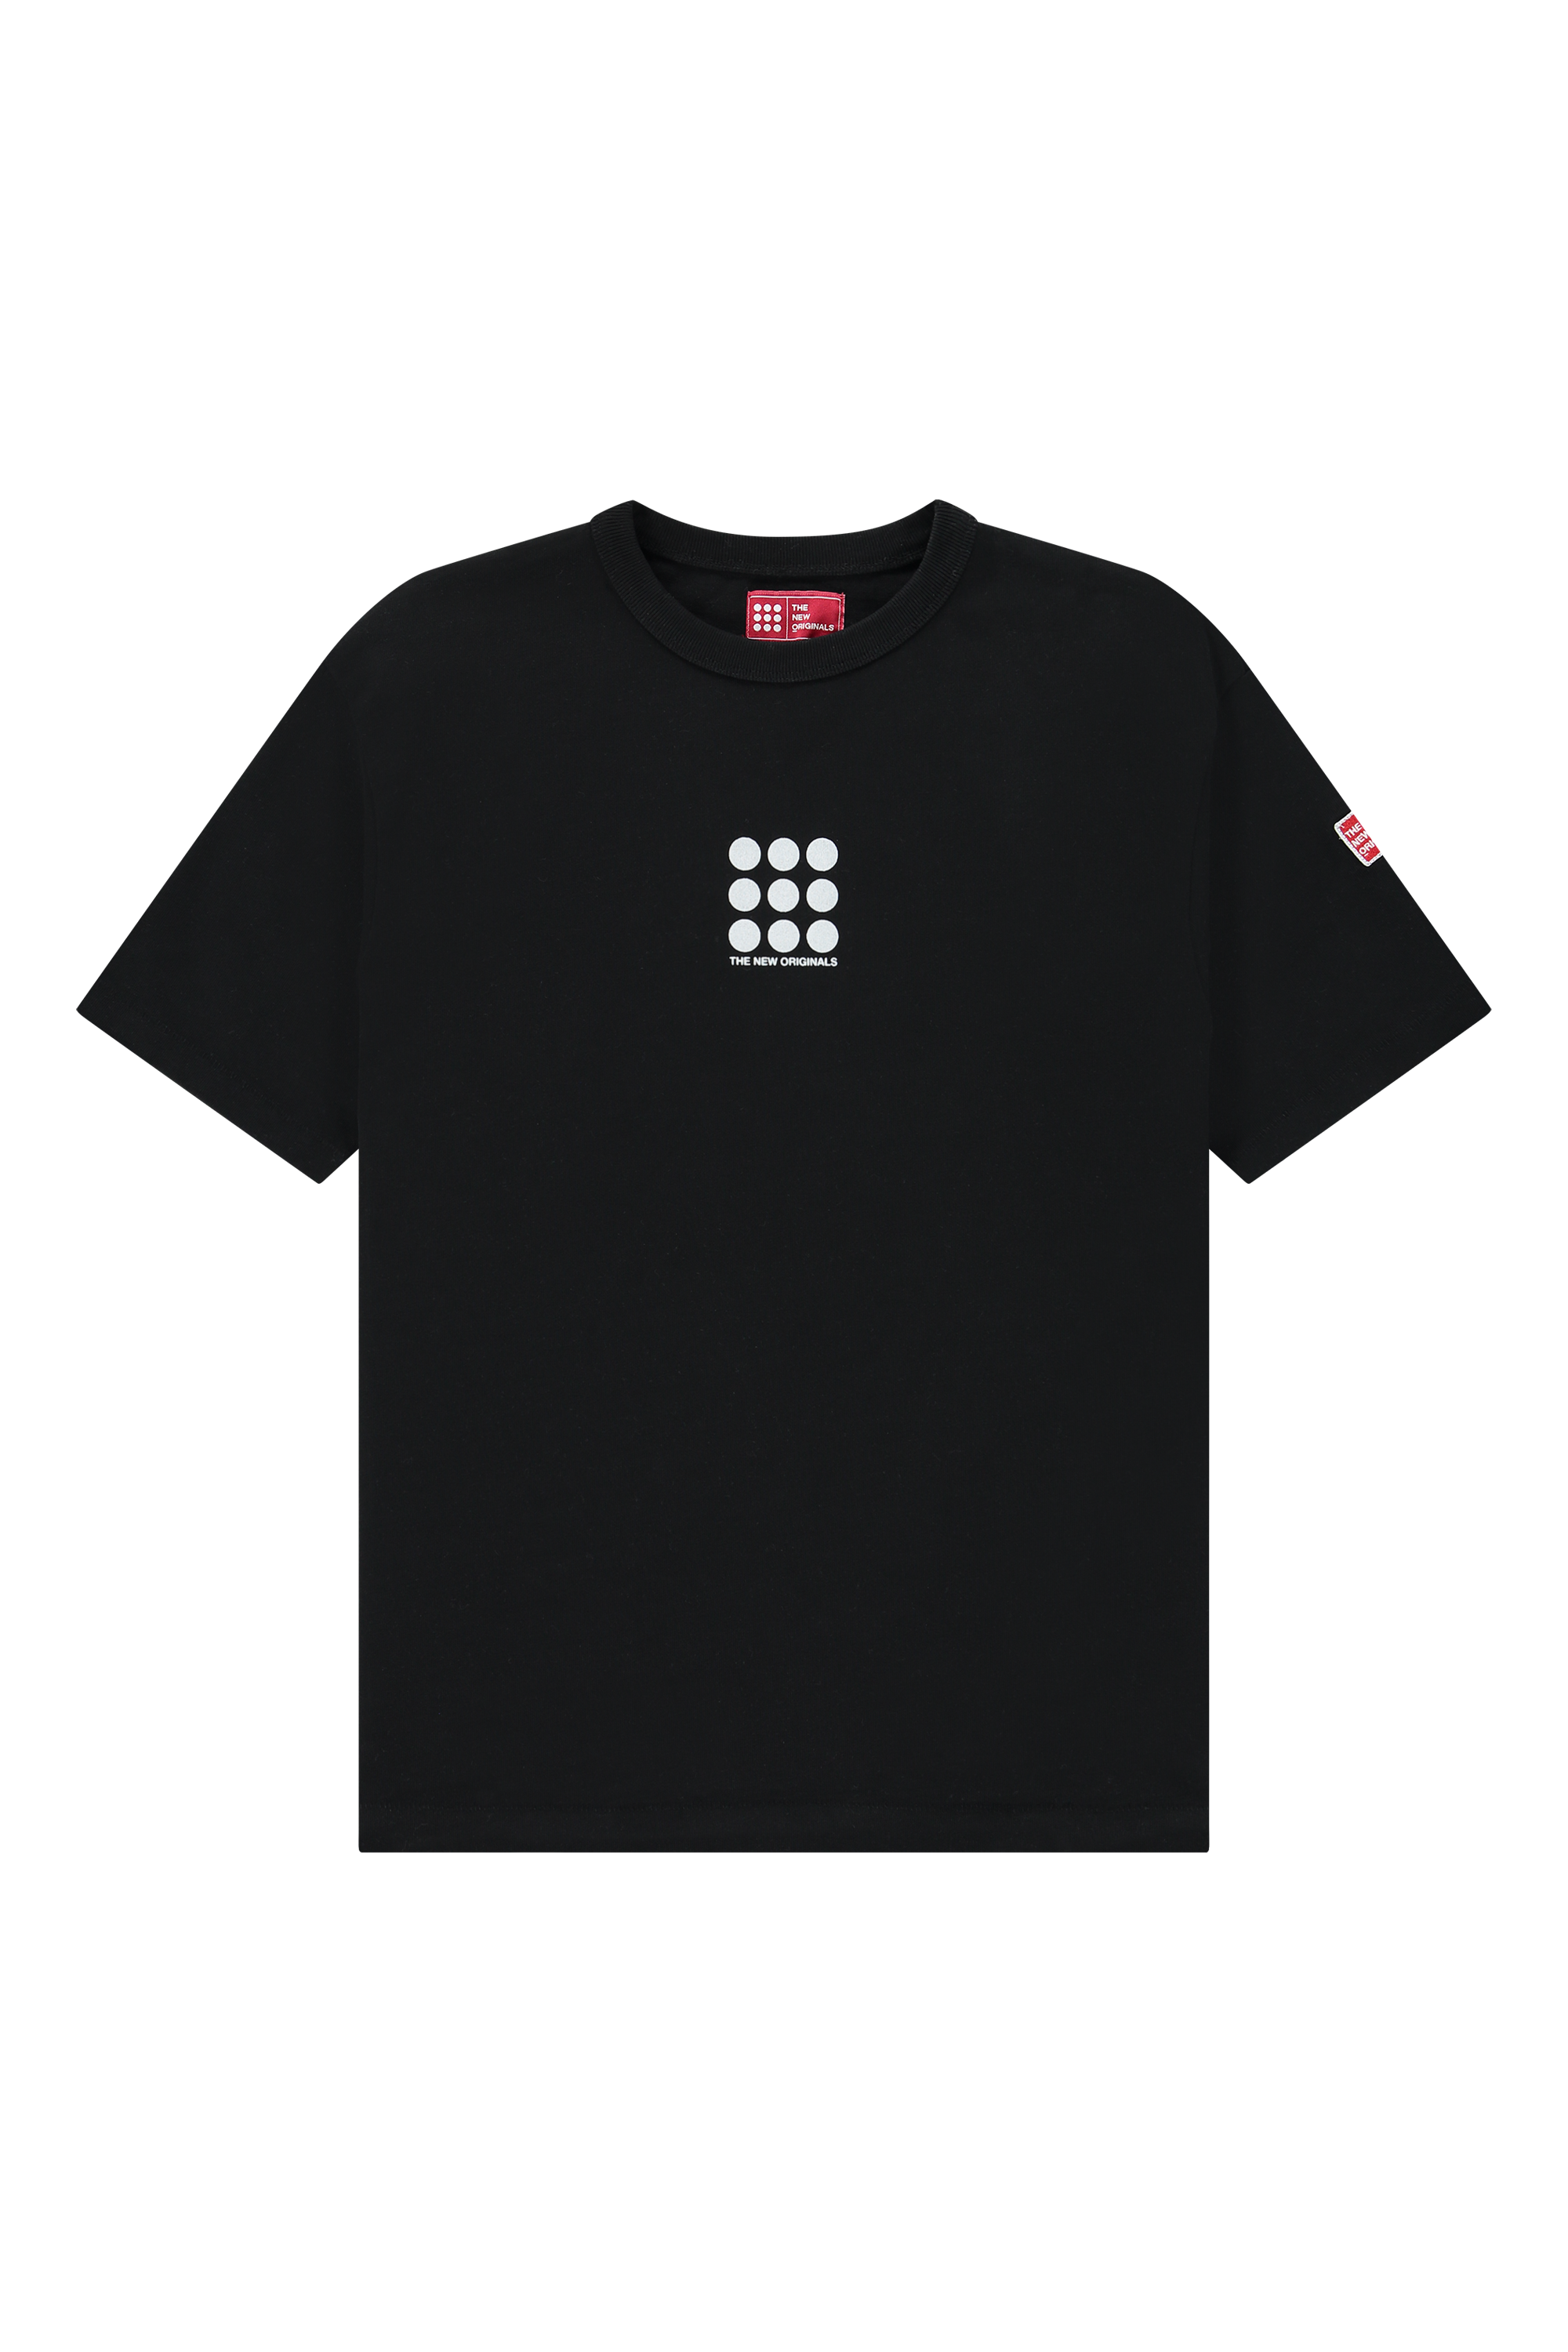 products-tshirt_black_front-png